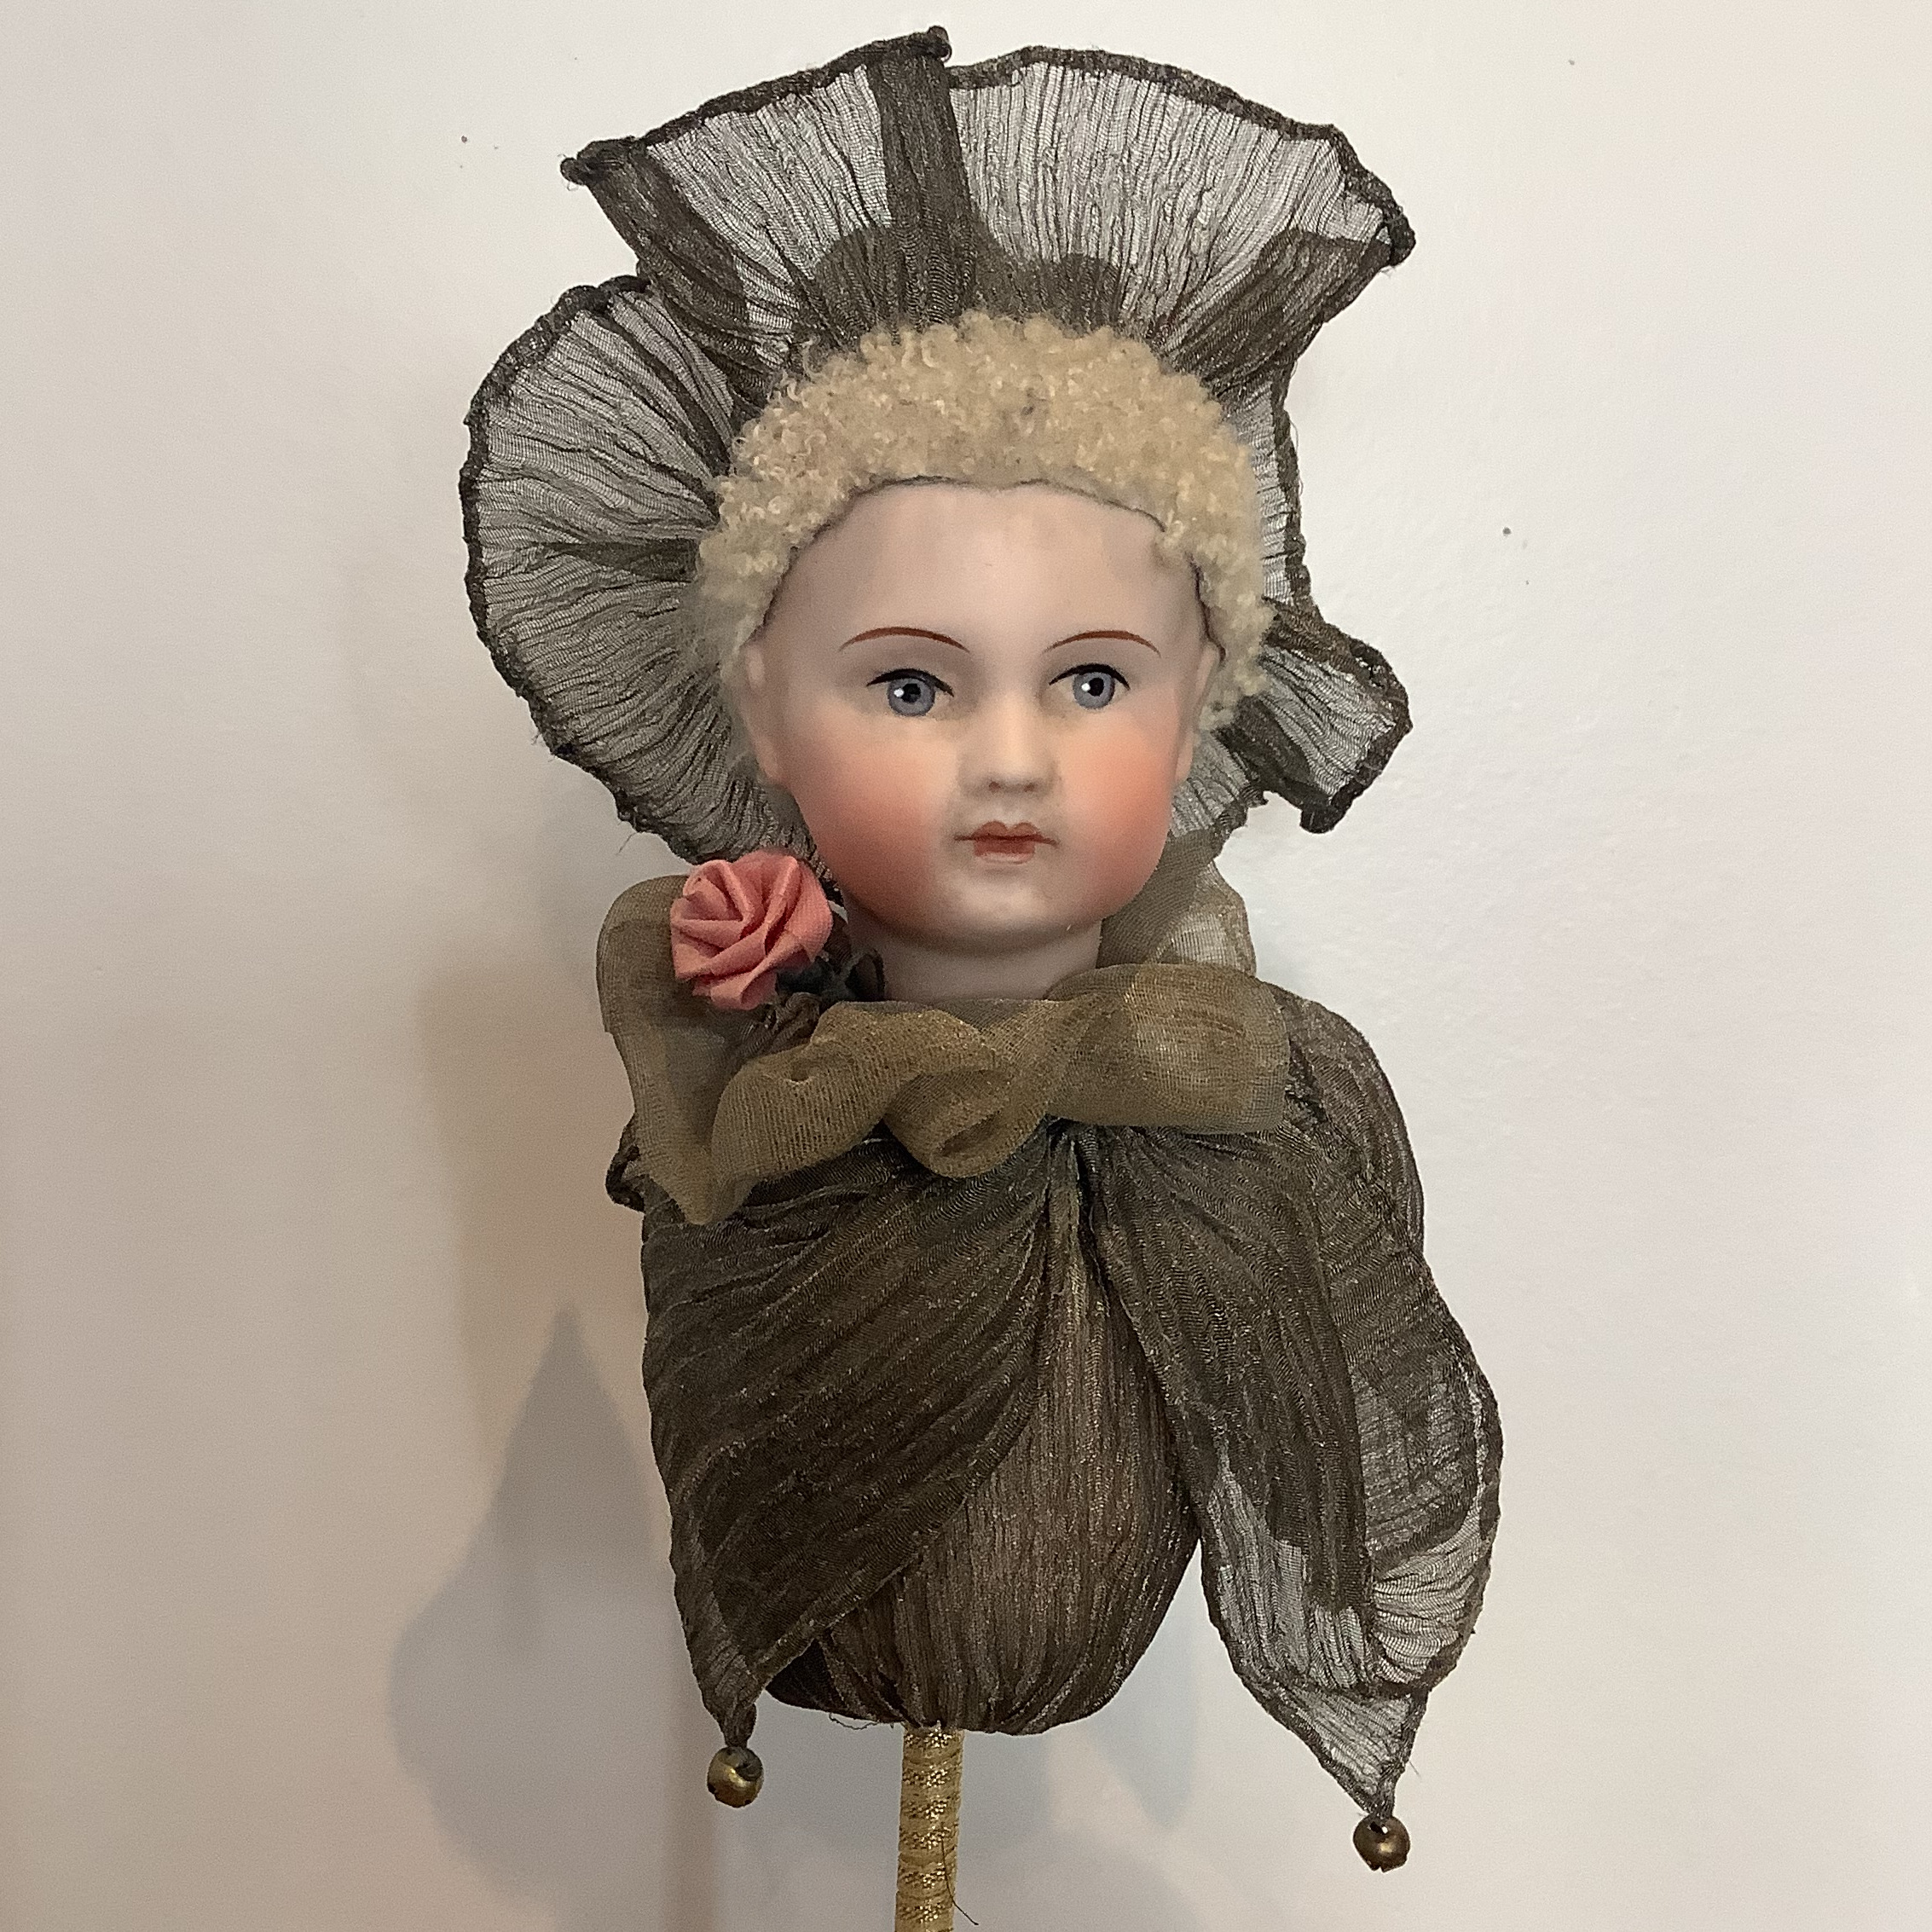 Partial doll on stick with sparkly grey costume and bells.